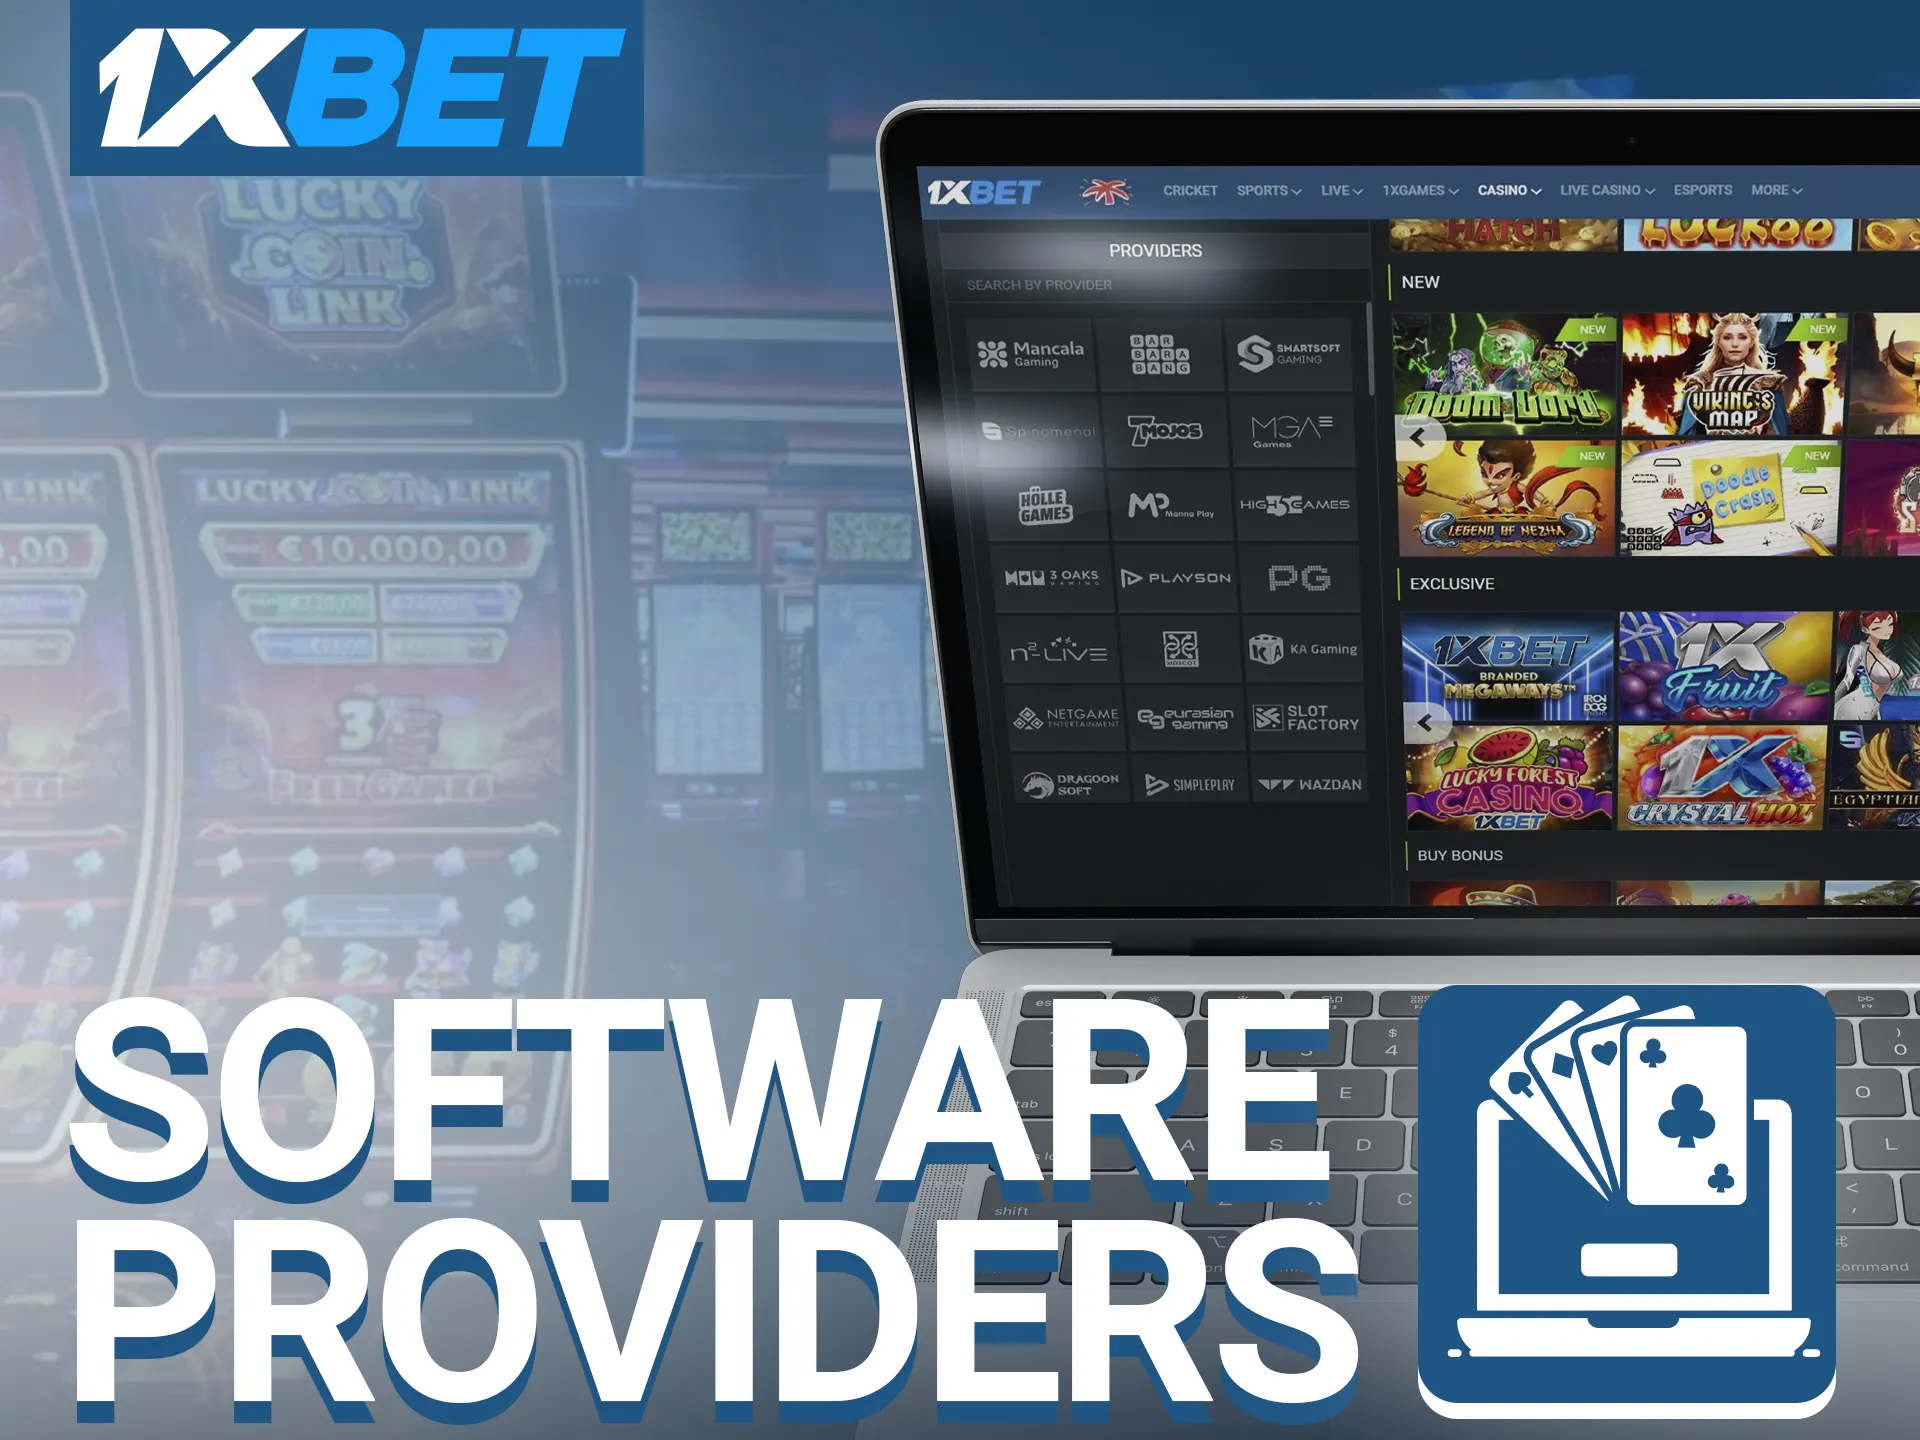 Slots, table games, live games are just a few of the many games offered by software providers.